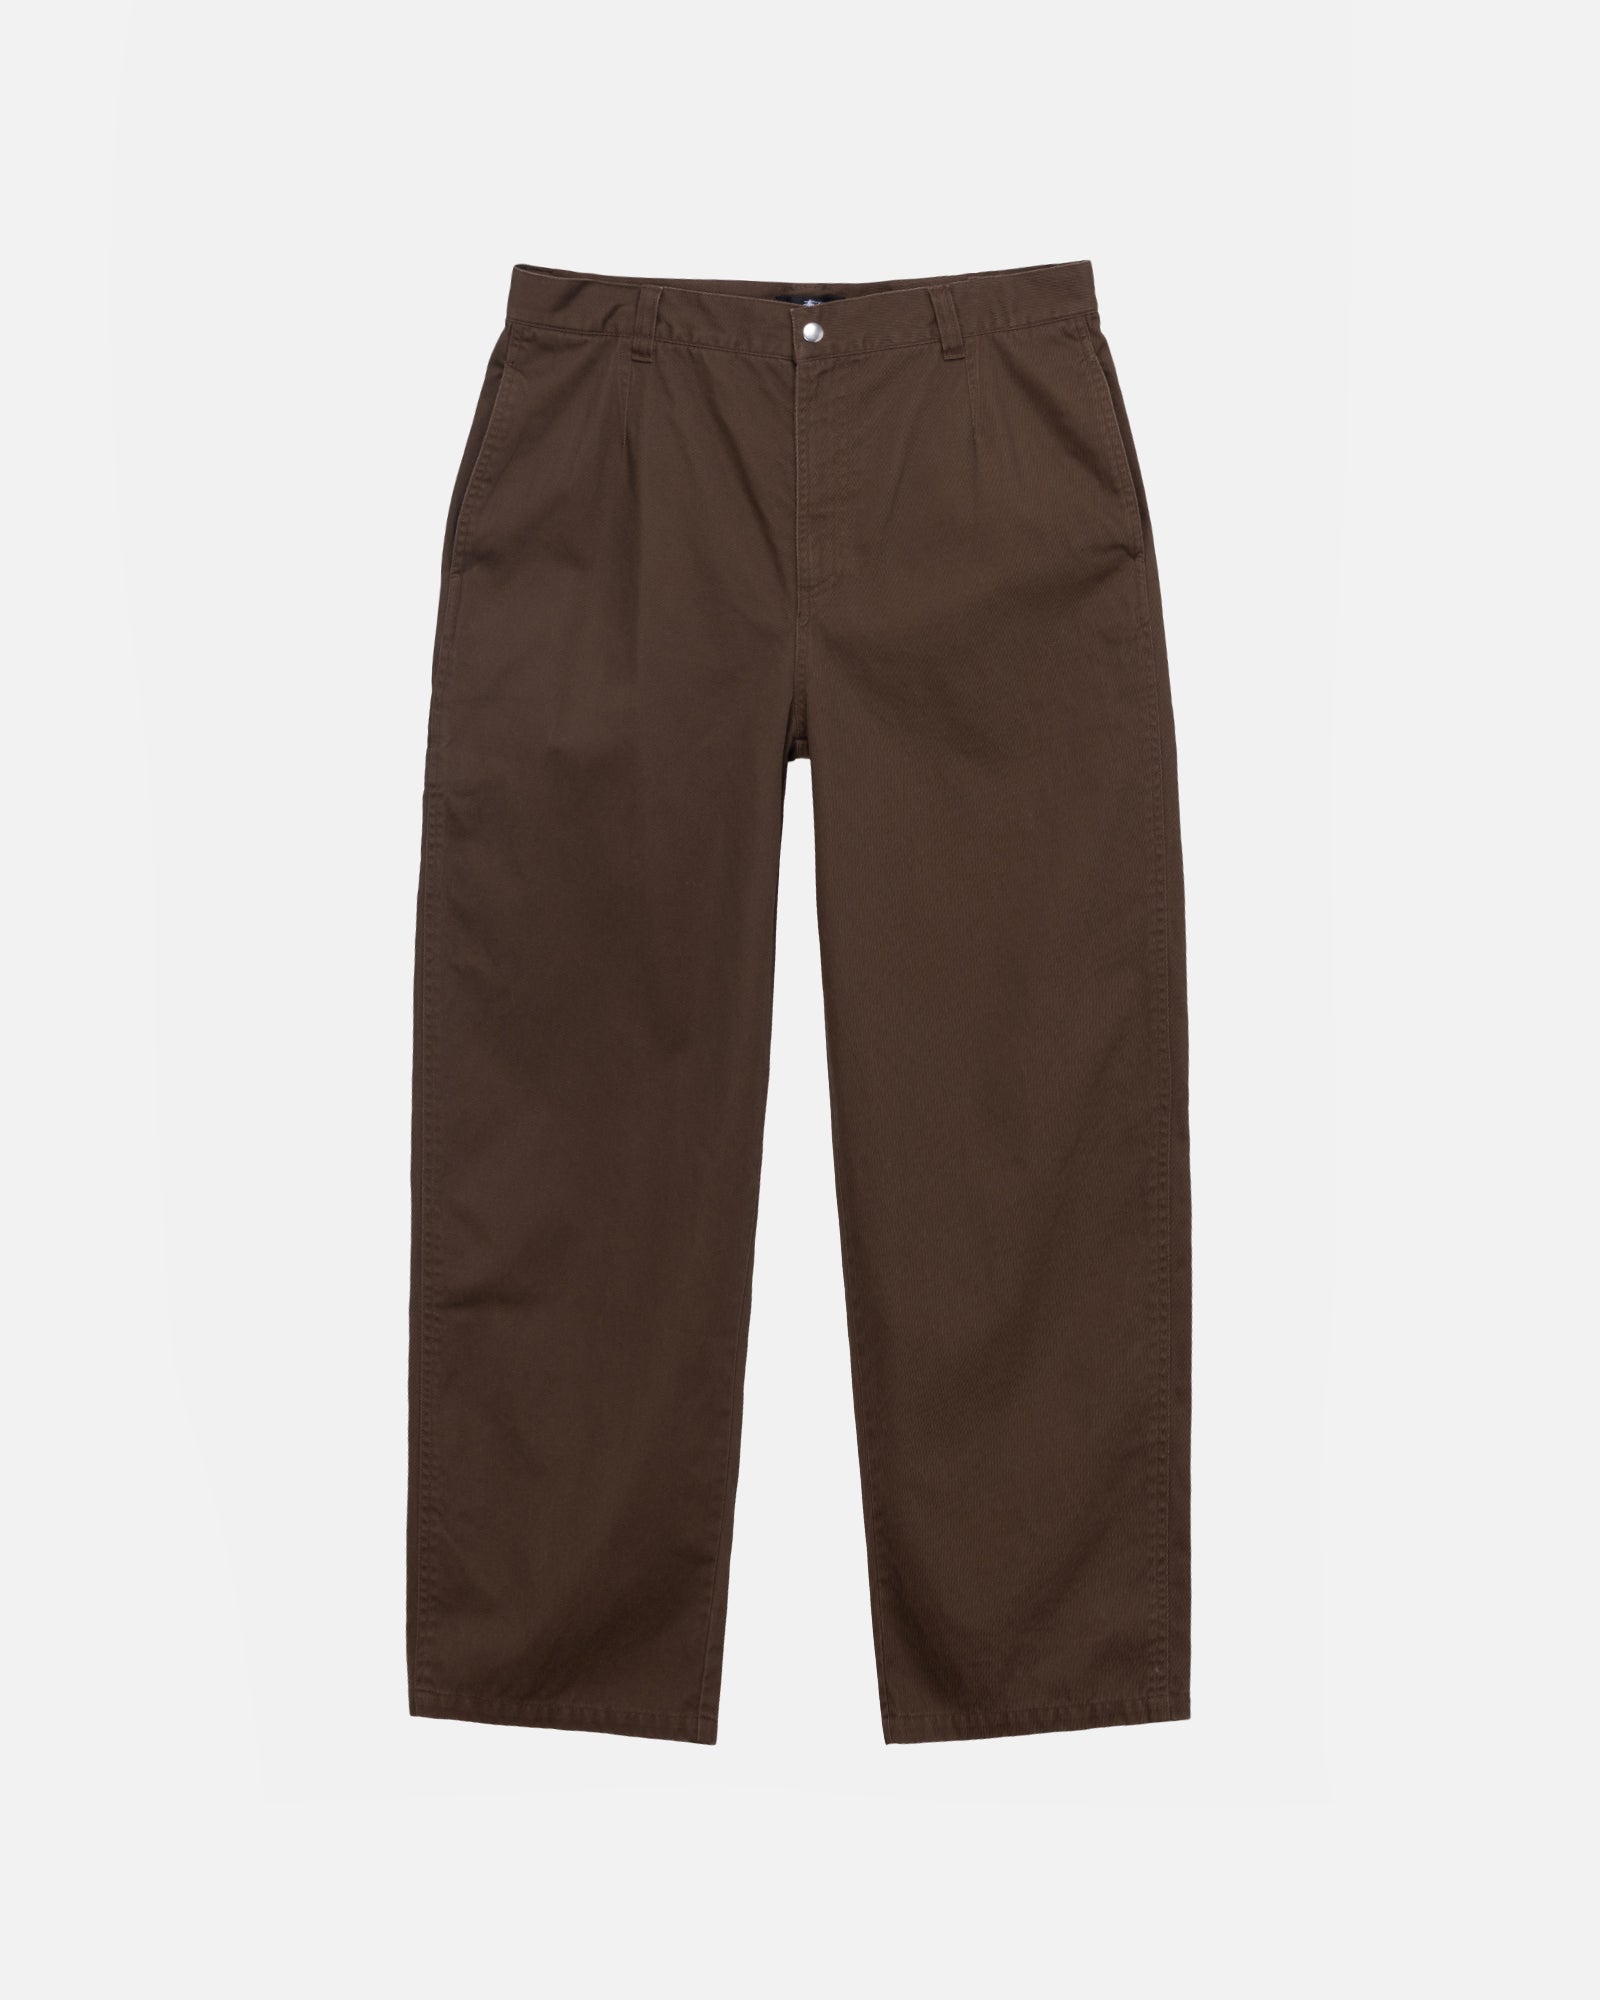 The Best Working From Home Trousers | Esquire